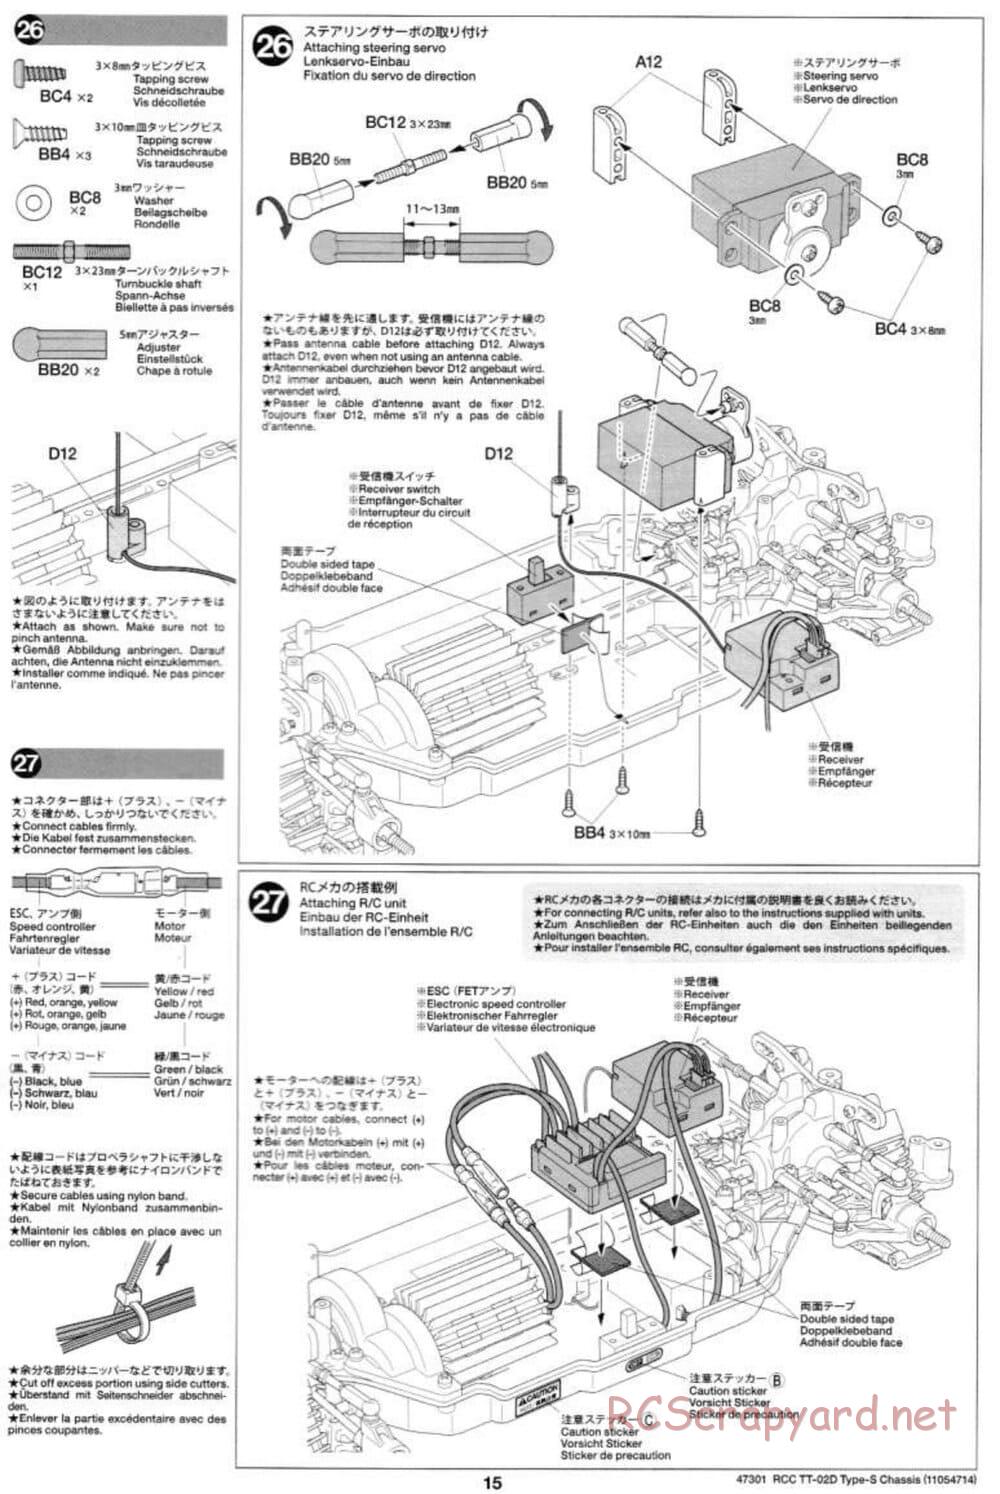 Tamiya - TT-02D Type-S Chassis - Manual - Page 15